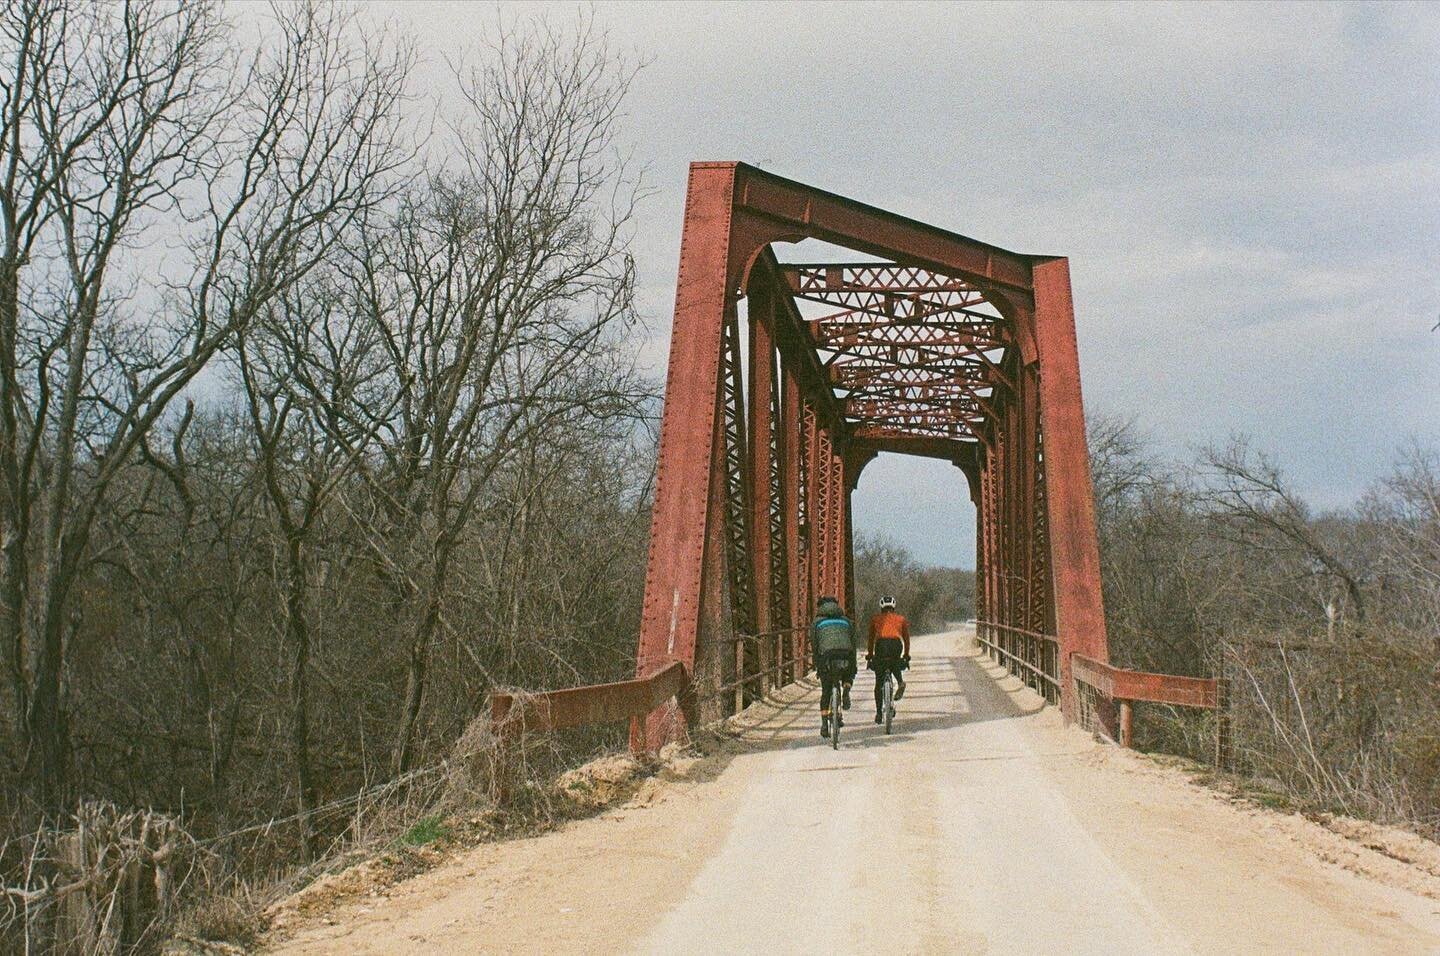 Back in February @jamespushespedals, @d.blinn and I went on an overnighter in the cross timbers of Texas. Starting in Hamilton, we stuck to tiny backroads, taking James&rsquo; route originally conceived of as a tour of historic bridges and water cros